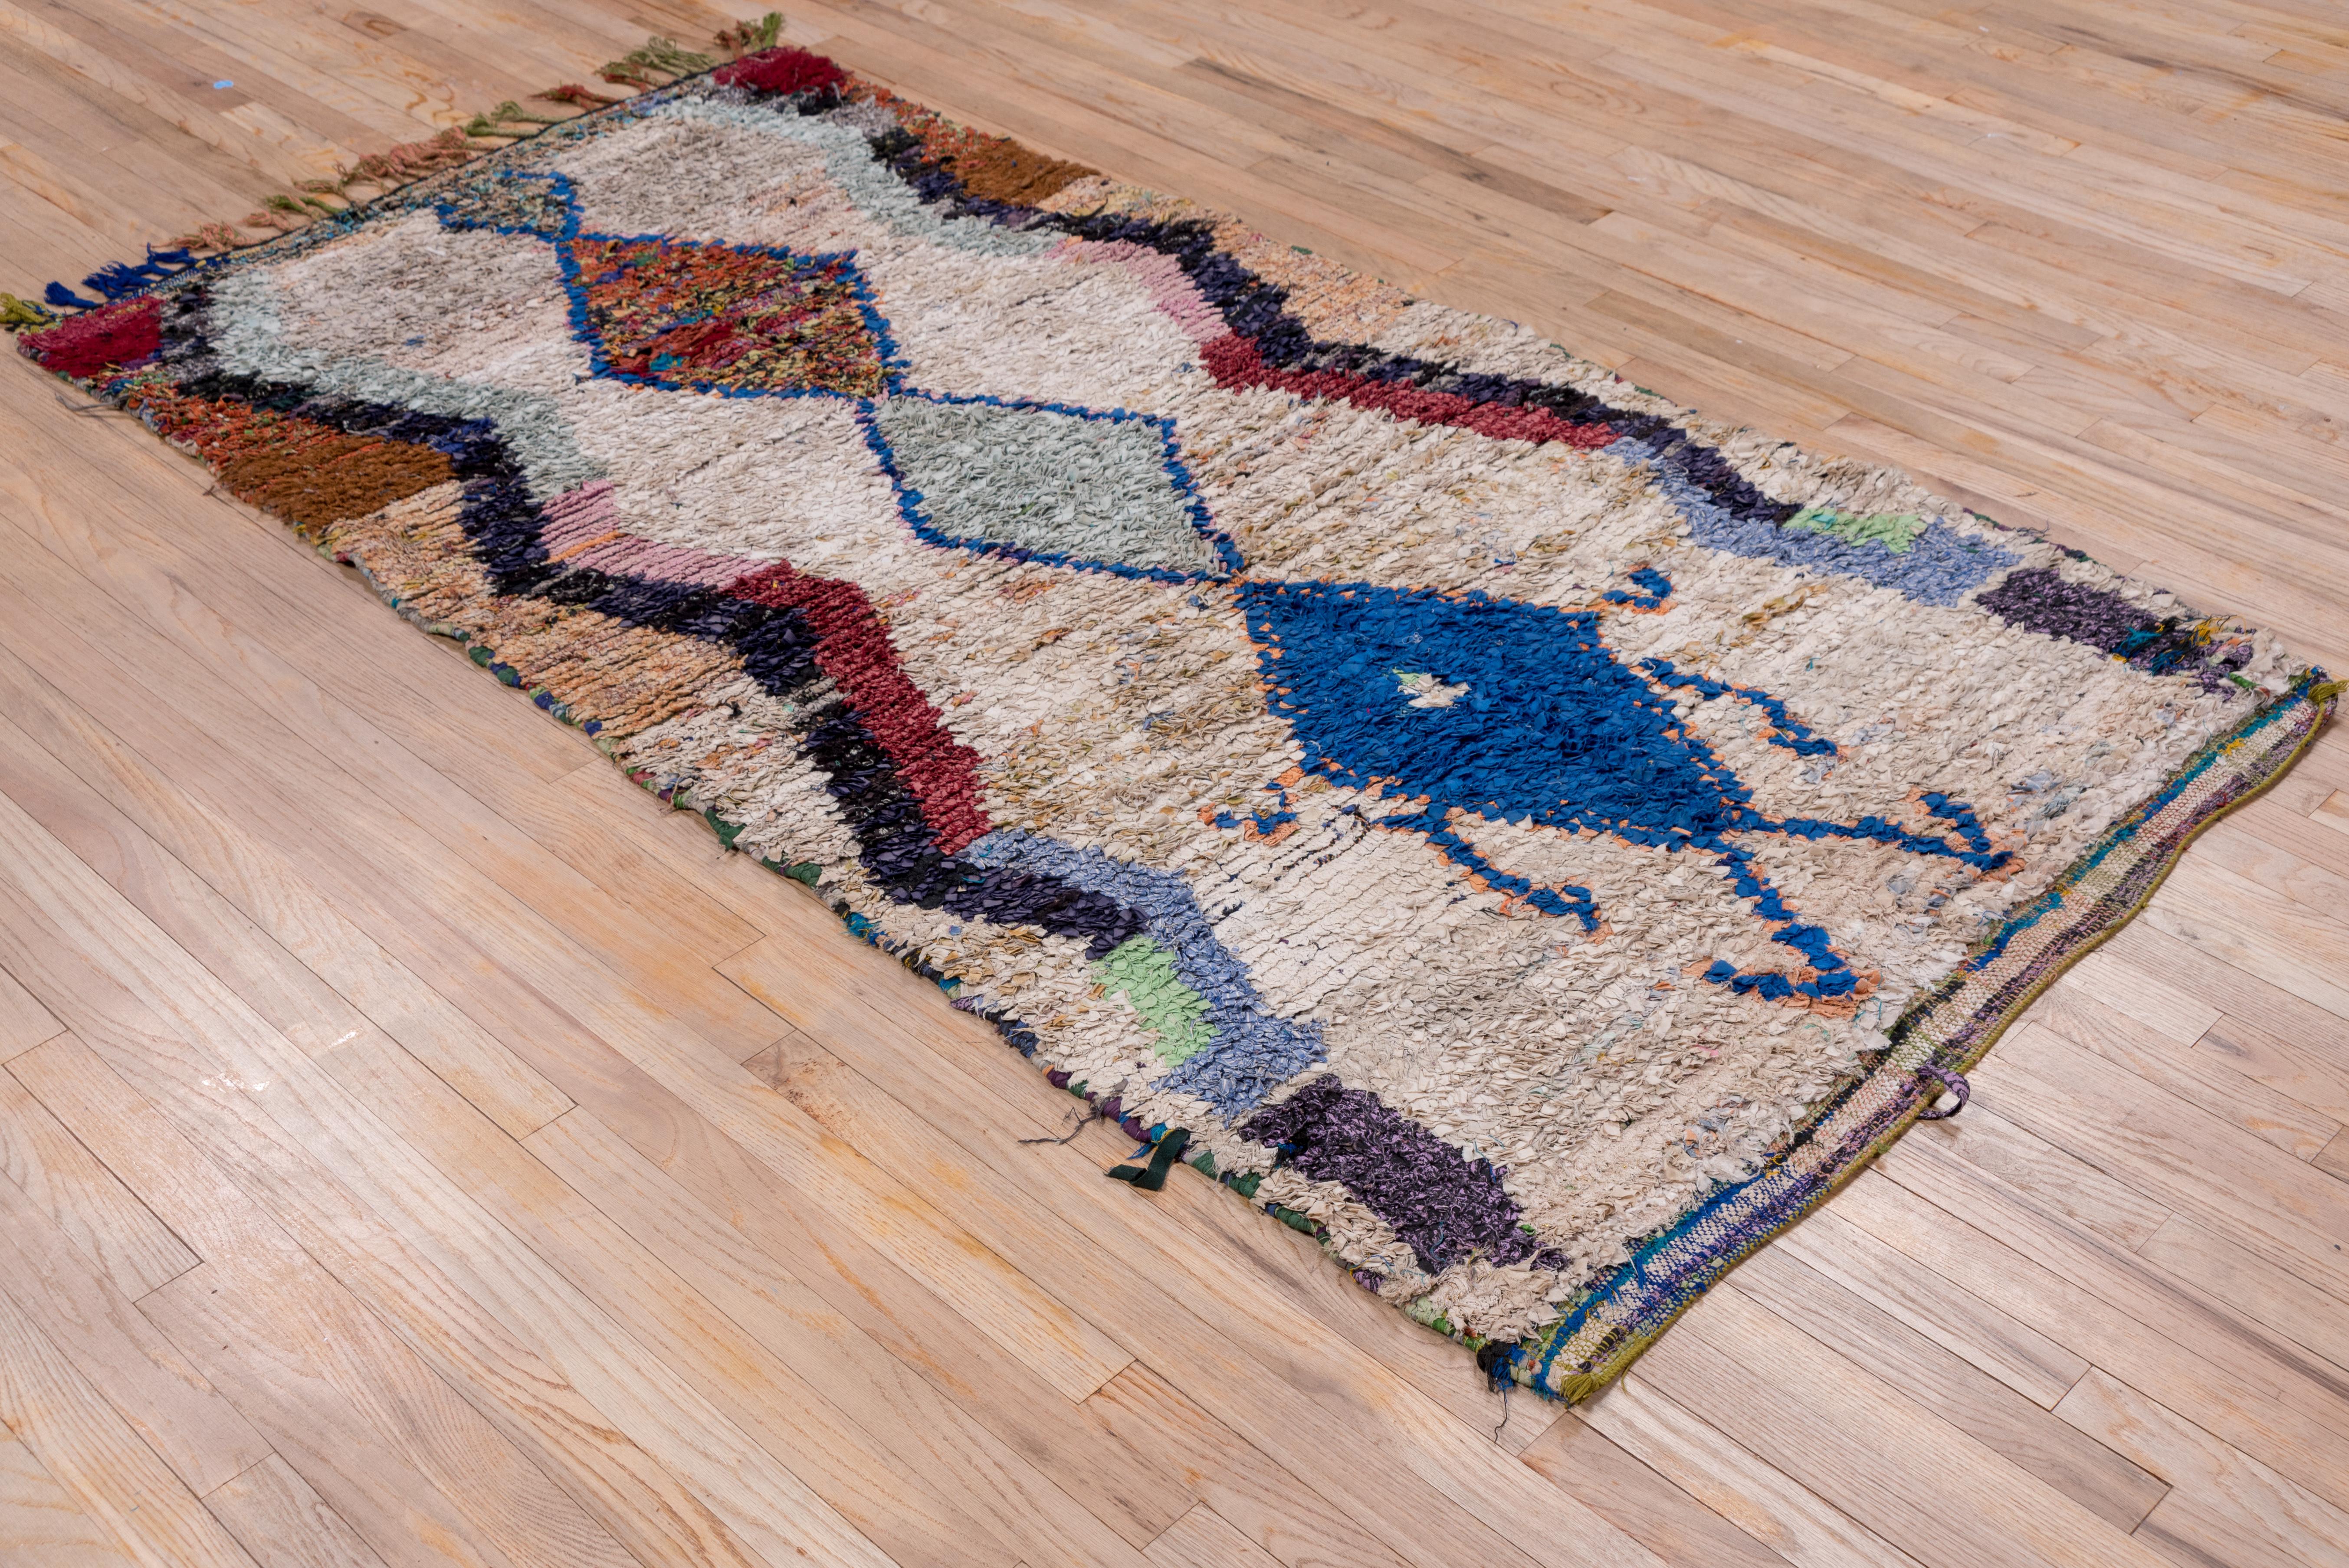 Instead of wool yarn, this modern tribal Moroccan scatter employs narrow strips of fabric in a simple lozenge panel pole medallion of speckled red, powder and blue, on a pearl ground. Lowest panel has arms and legs! Red and blue side zig-zags and